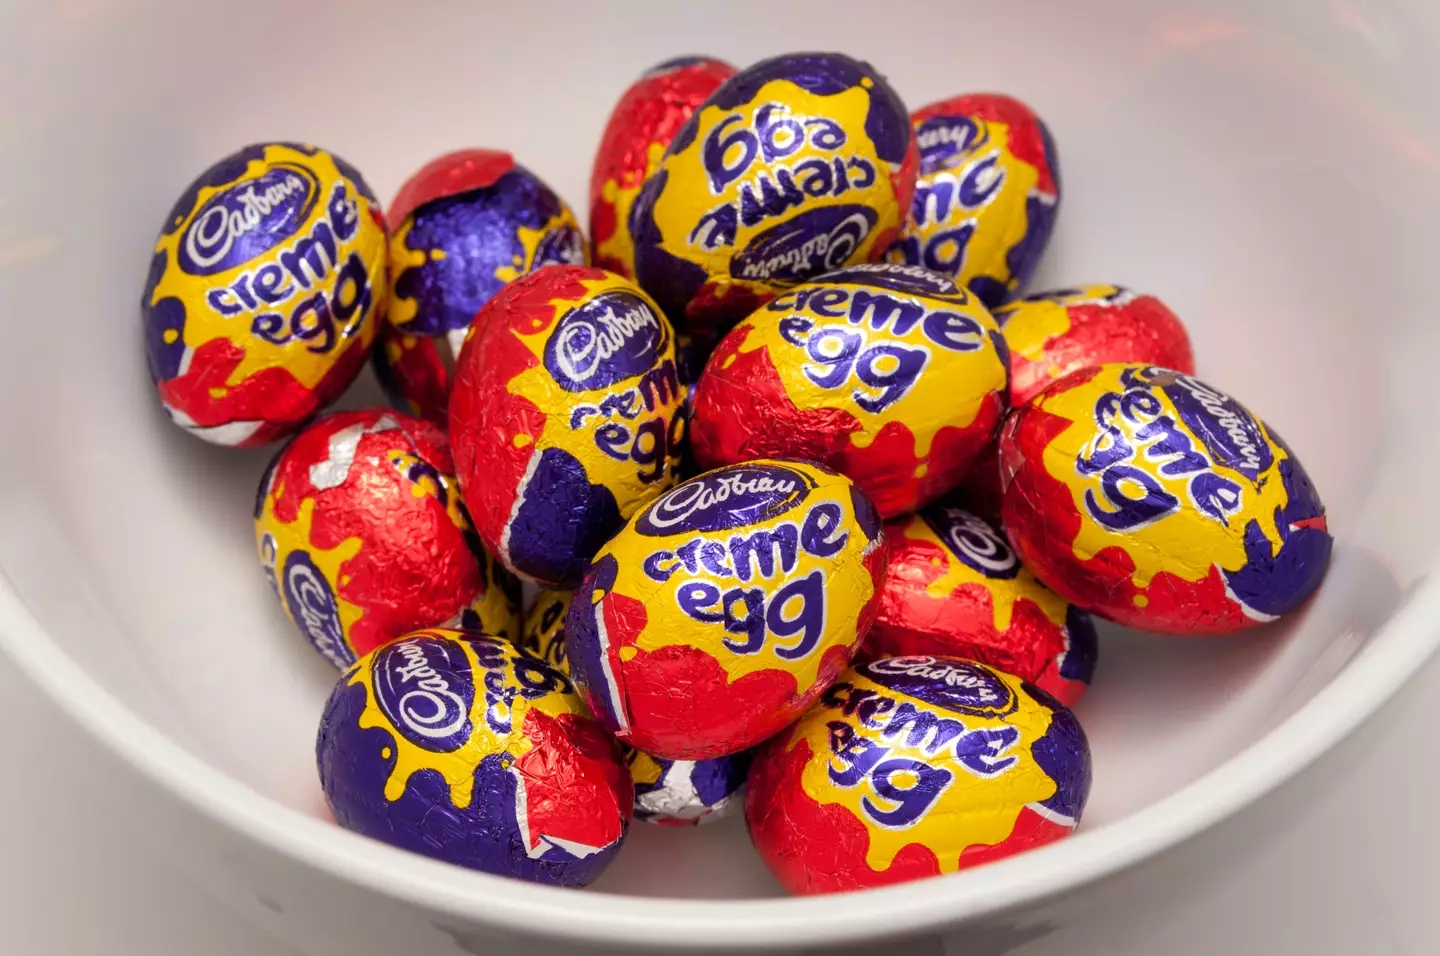 Creme Eggs is very much an easter treat.